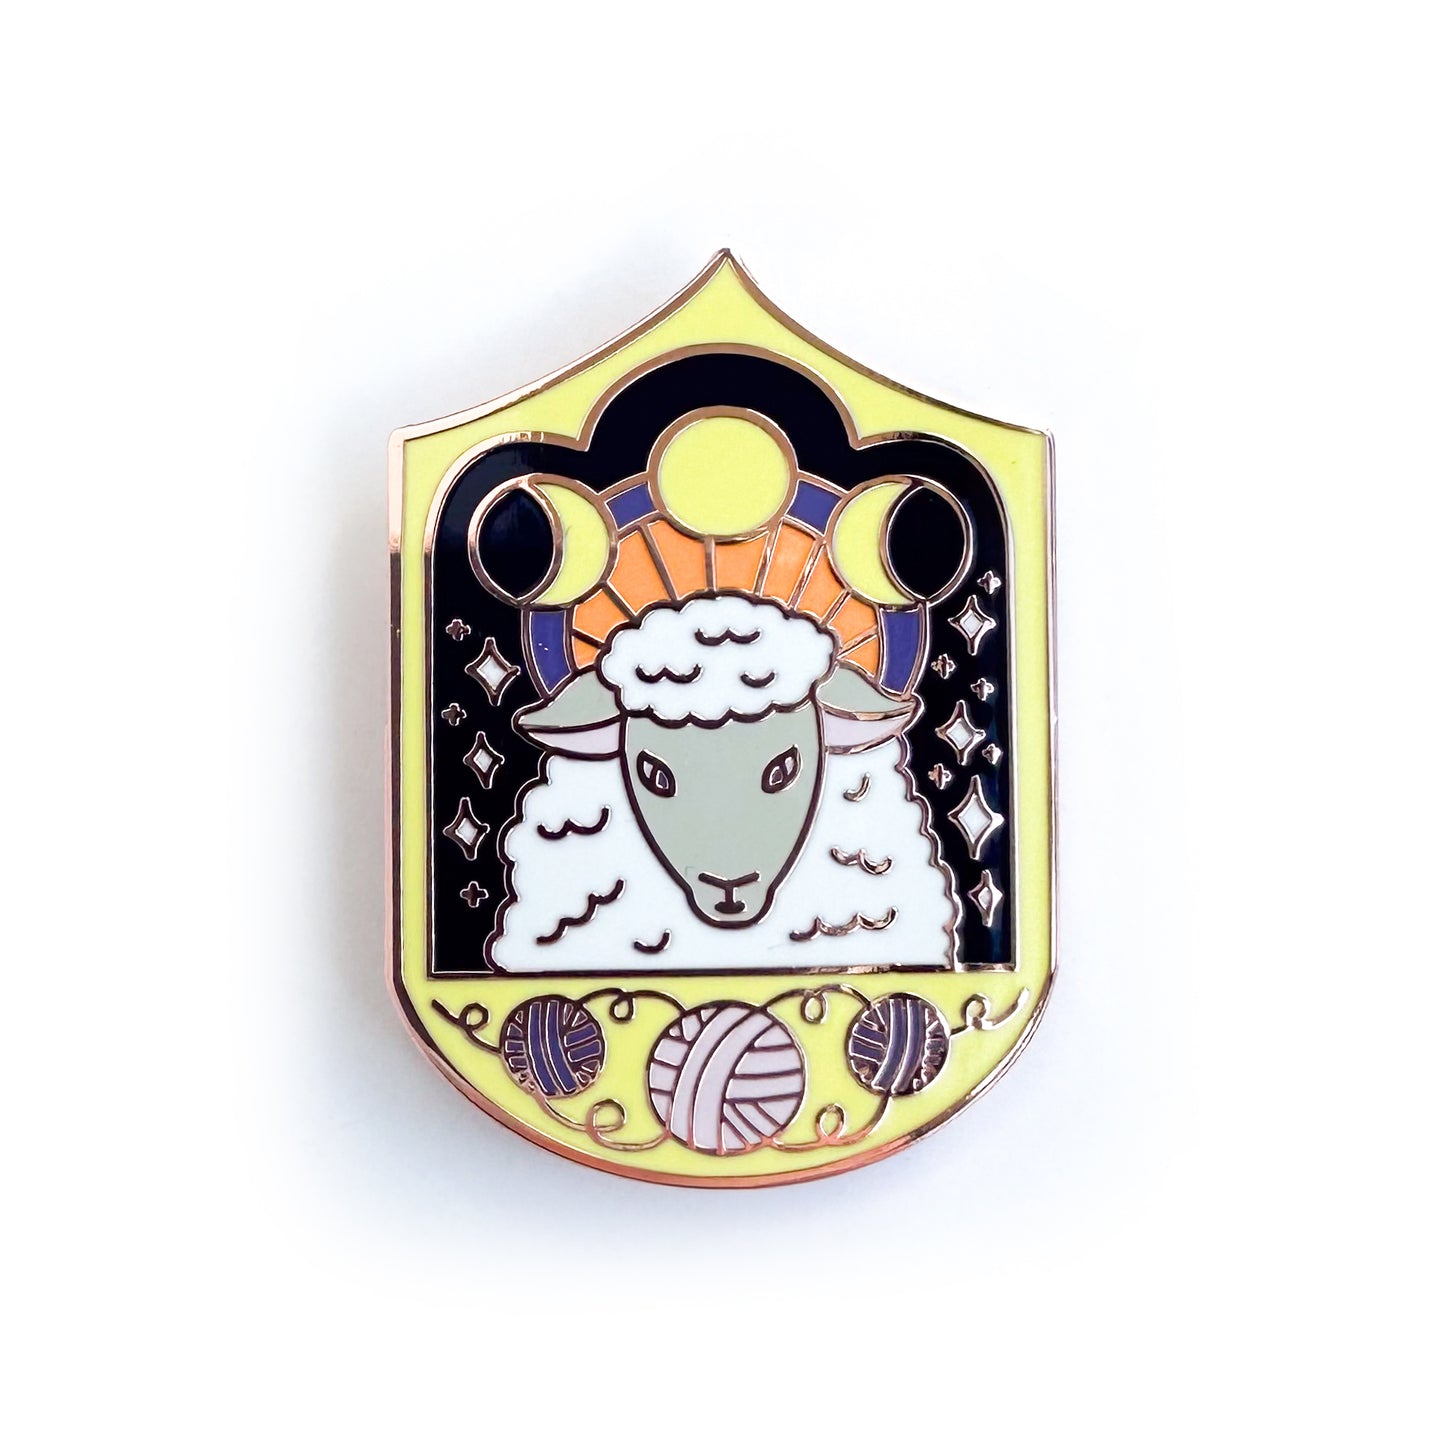 An enamel pin with a sheep surrounded by stars in a yellow Fram. The sheep has a halo with moon phases on it and the frame has yarn balls on it. 